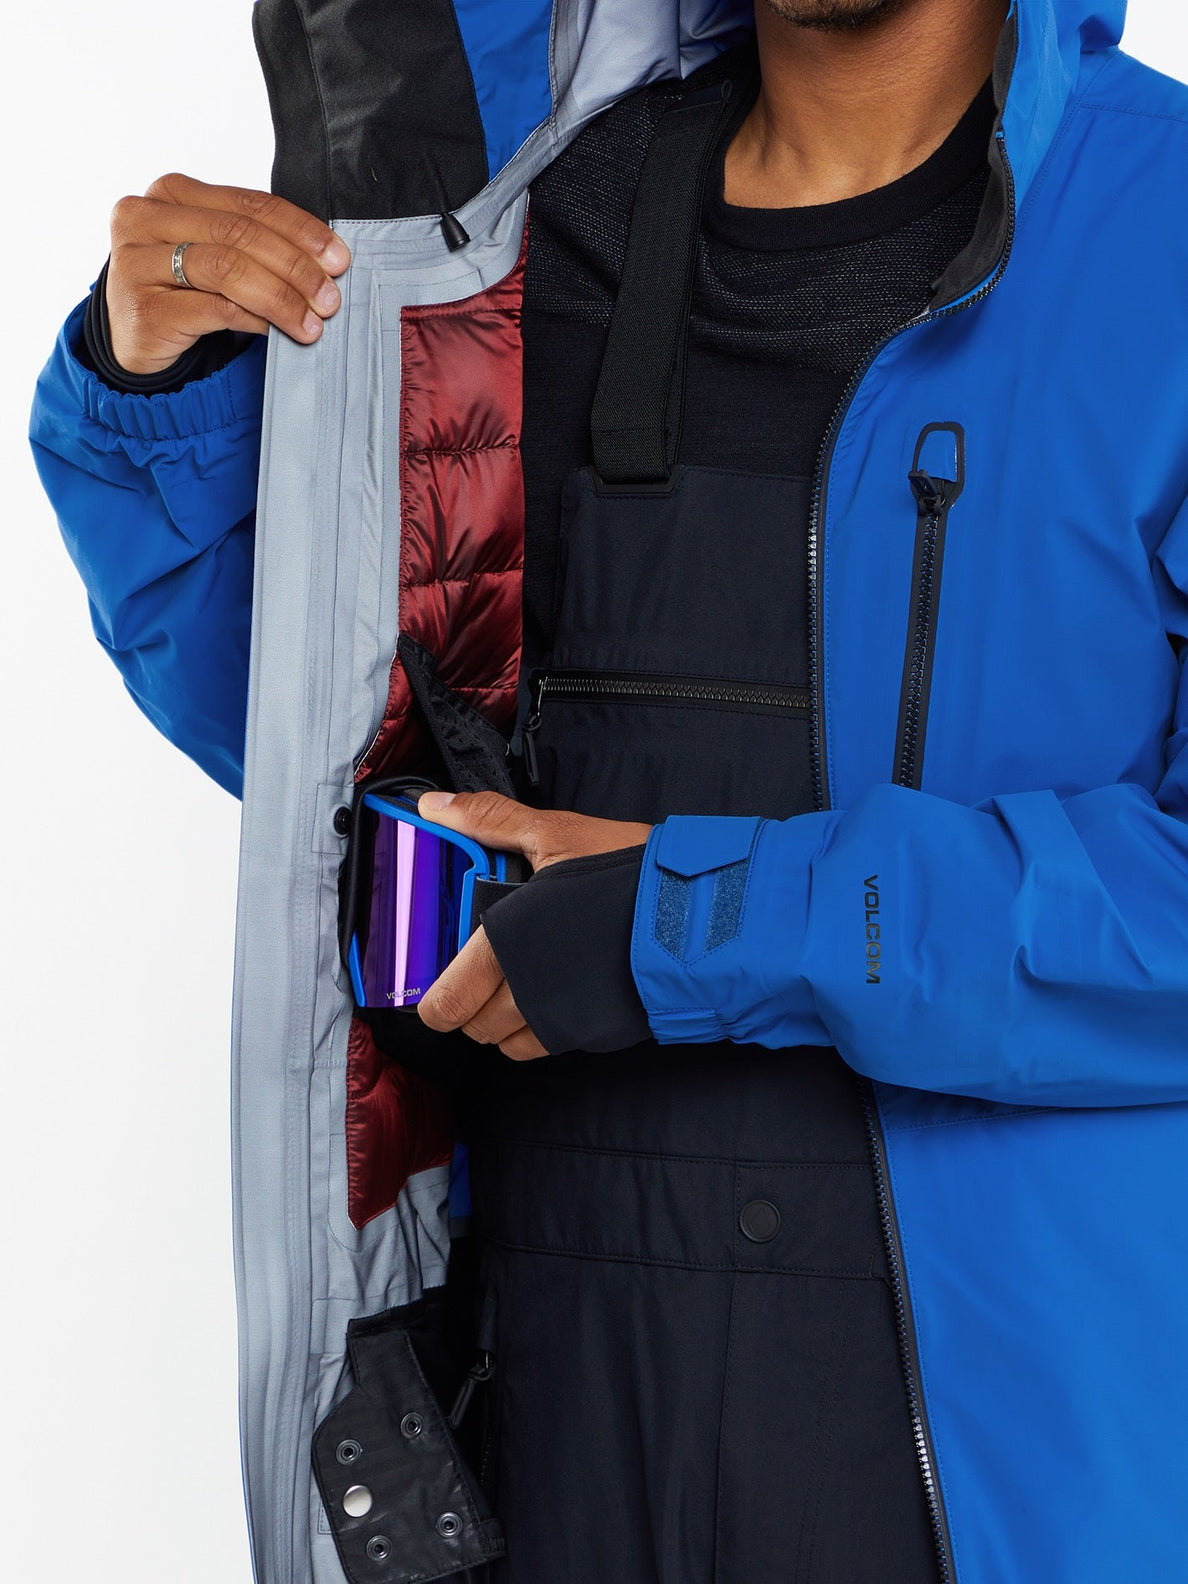 Tds Infrared Gore-Tex Jacke - ELECTRIC BLUE